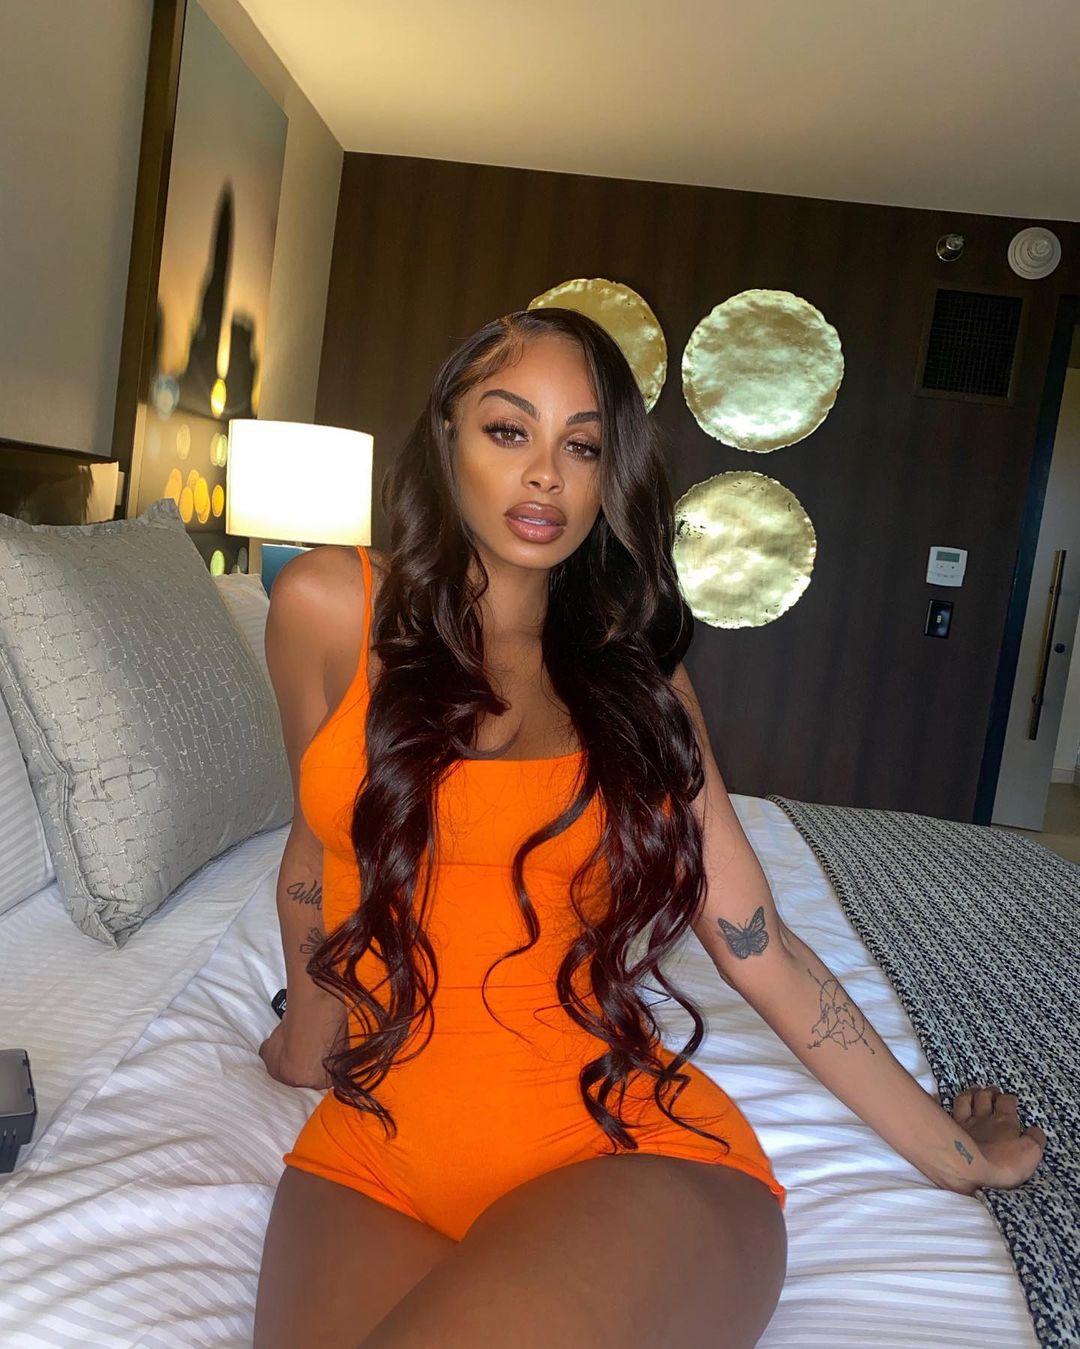 A photo showing Ana Montana sitting on a bed in an orange color outfit